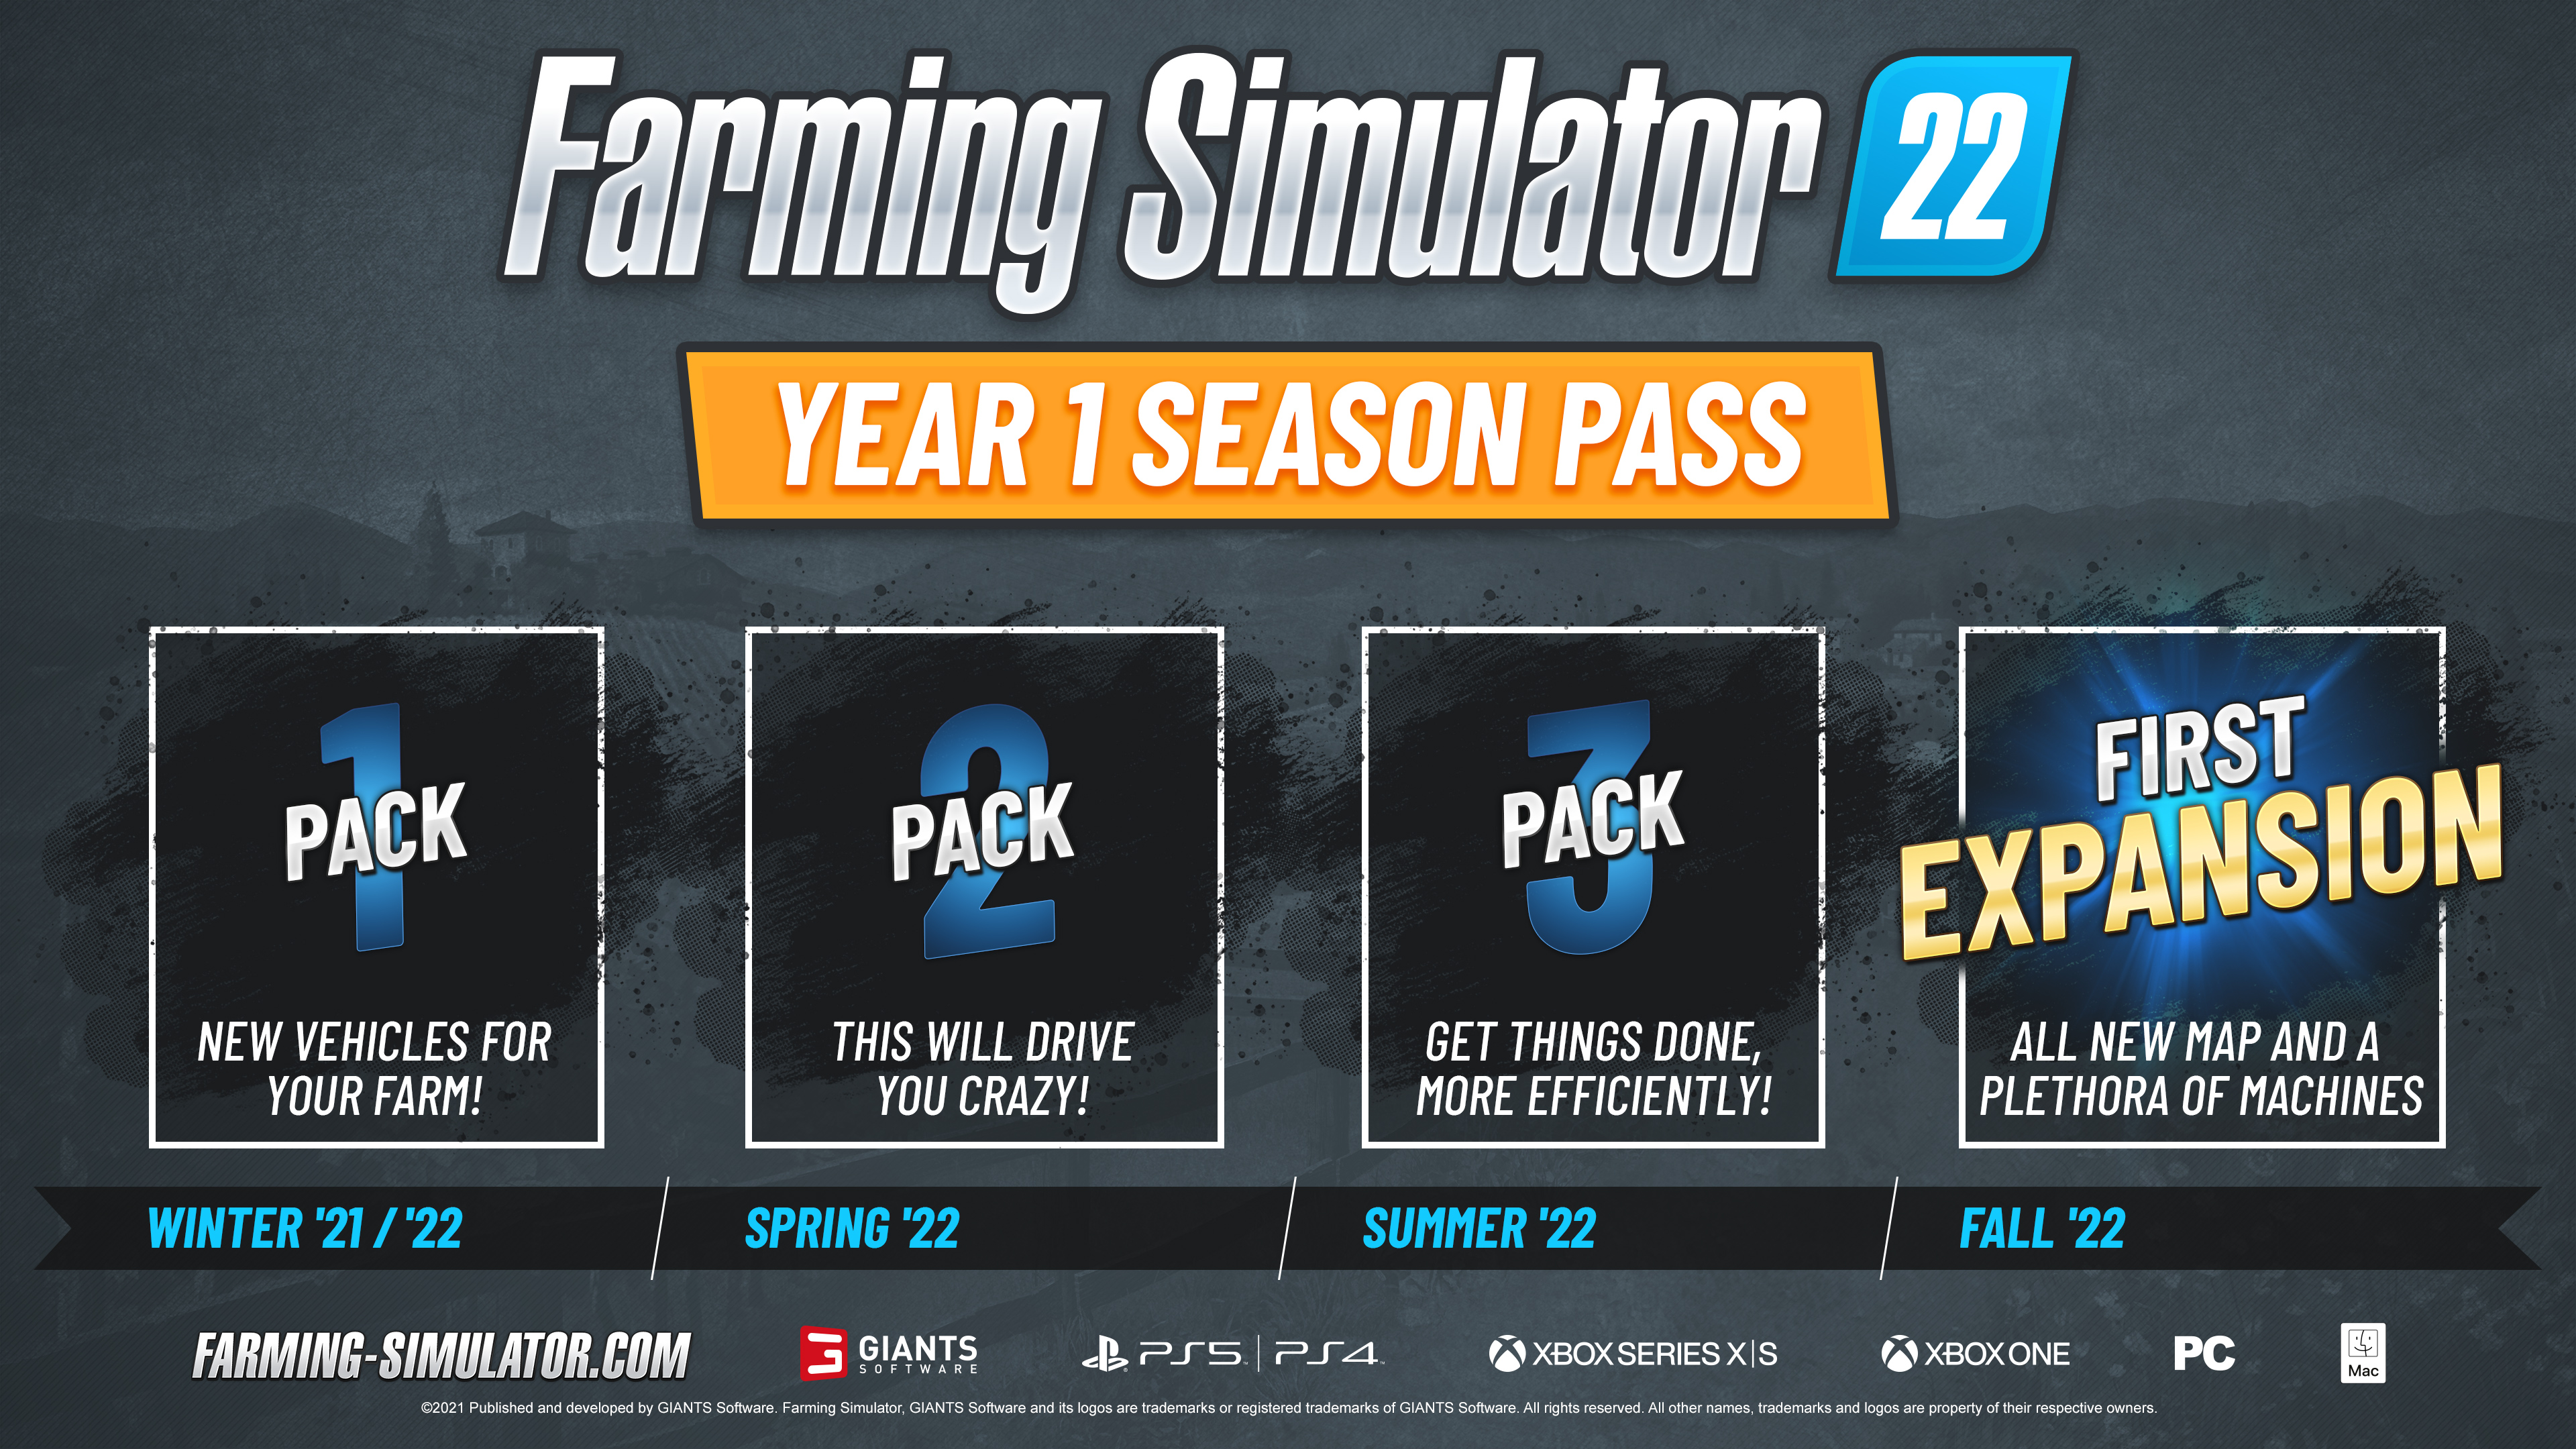 Season Pass for Farming Simulator is available to pre-order